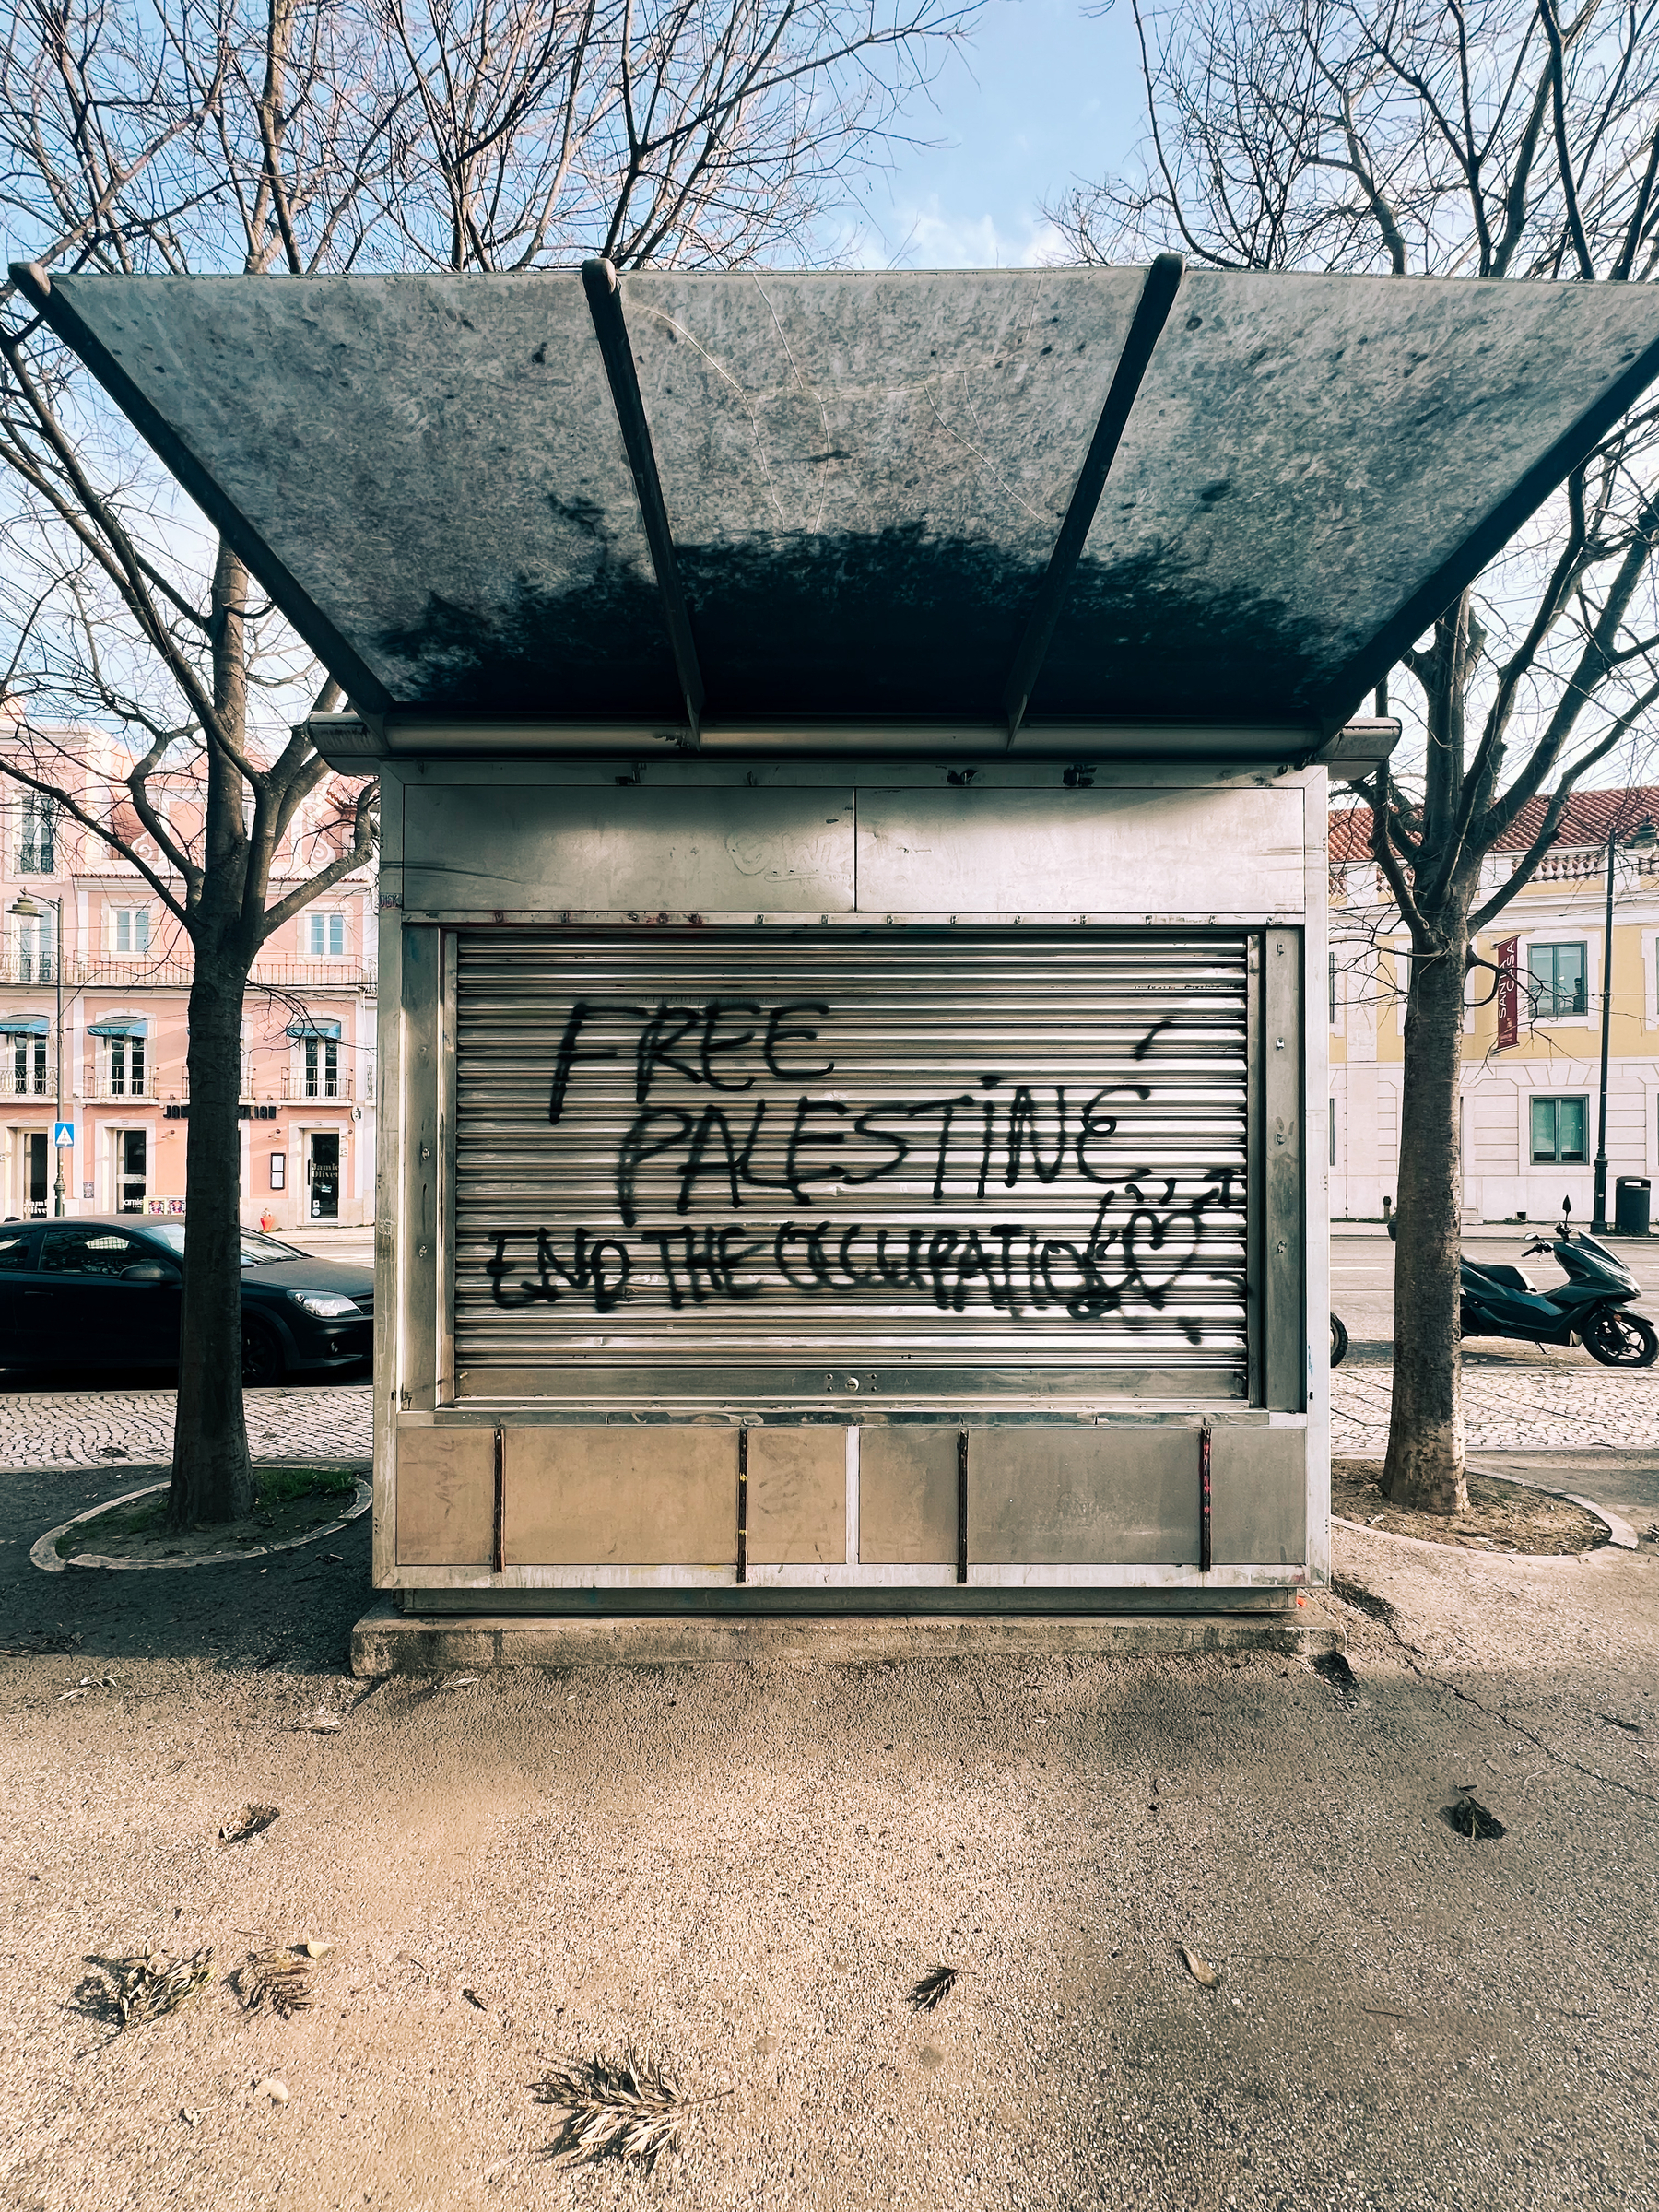 A shuttered kiosk with graffiti that reads &ldquo;Free Palestine End the Occupation&rdquo; on its metal closure, with trees and a clear sky in the background.